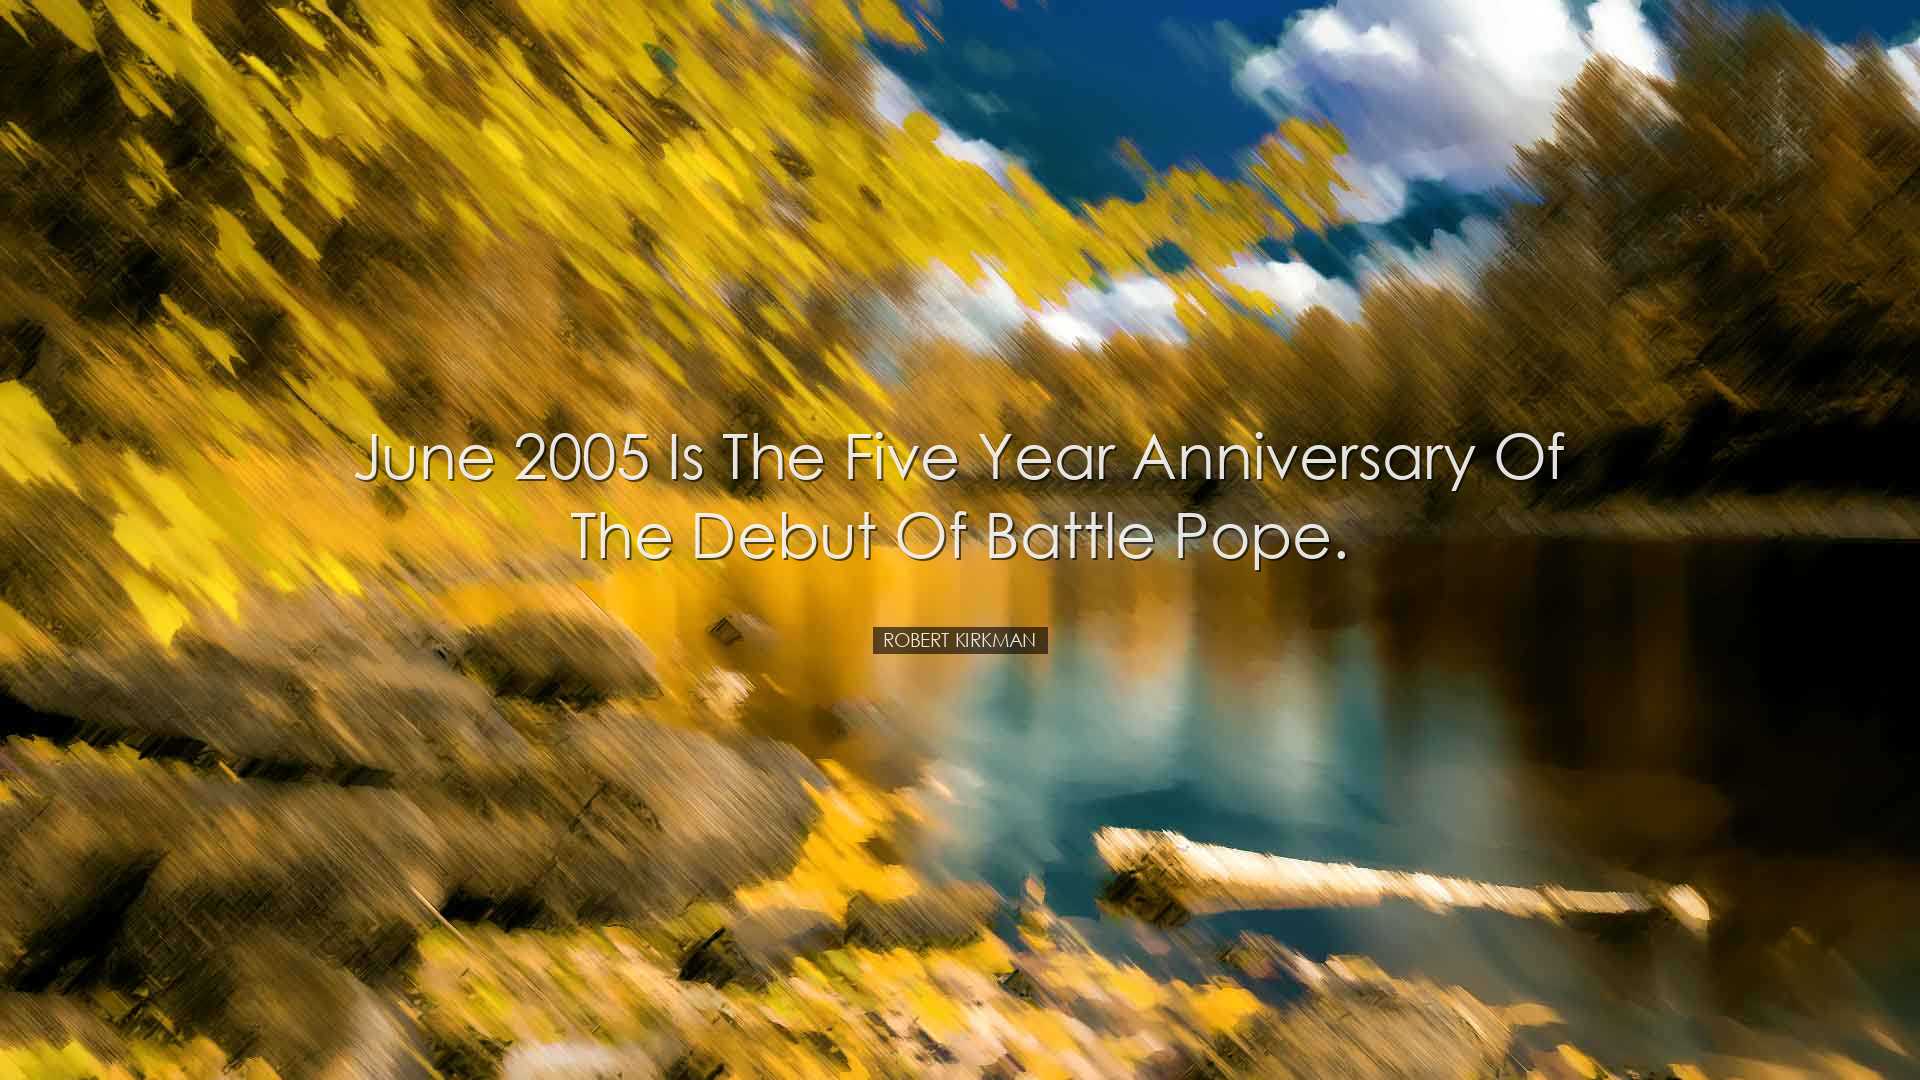 June 2005 is the five year anniversary of the debut of Battle Pope